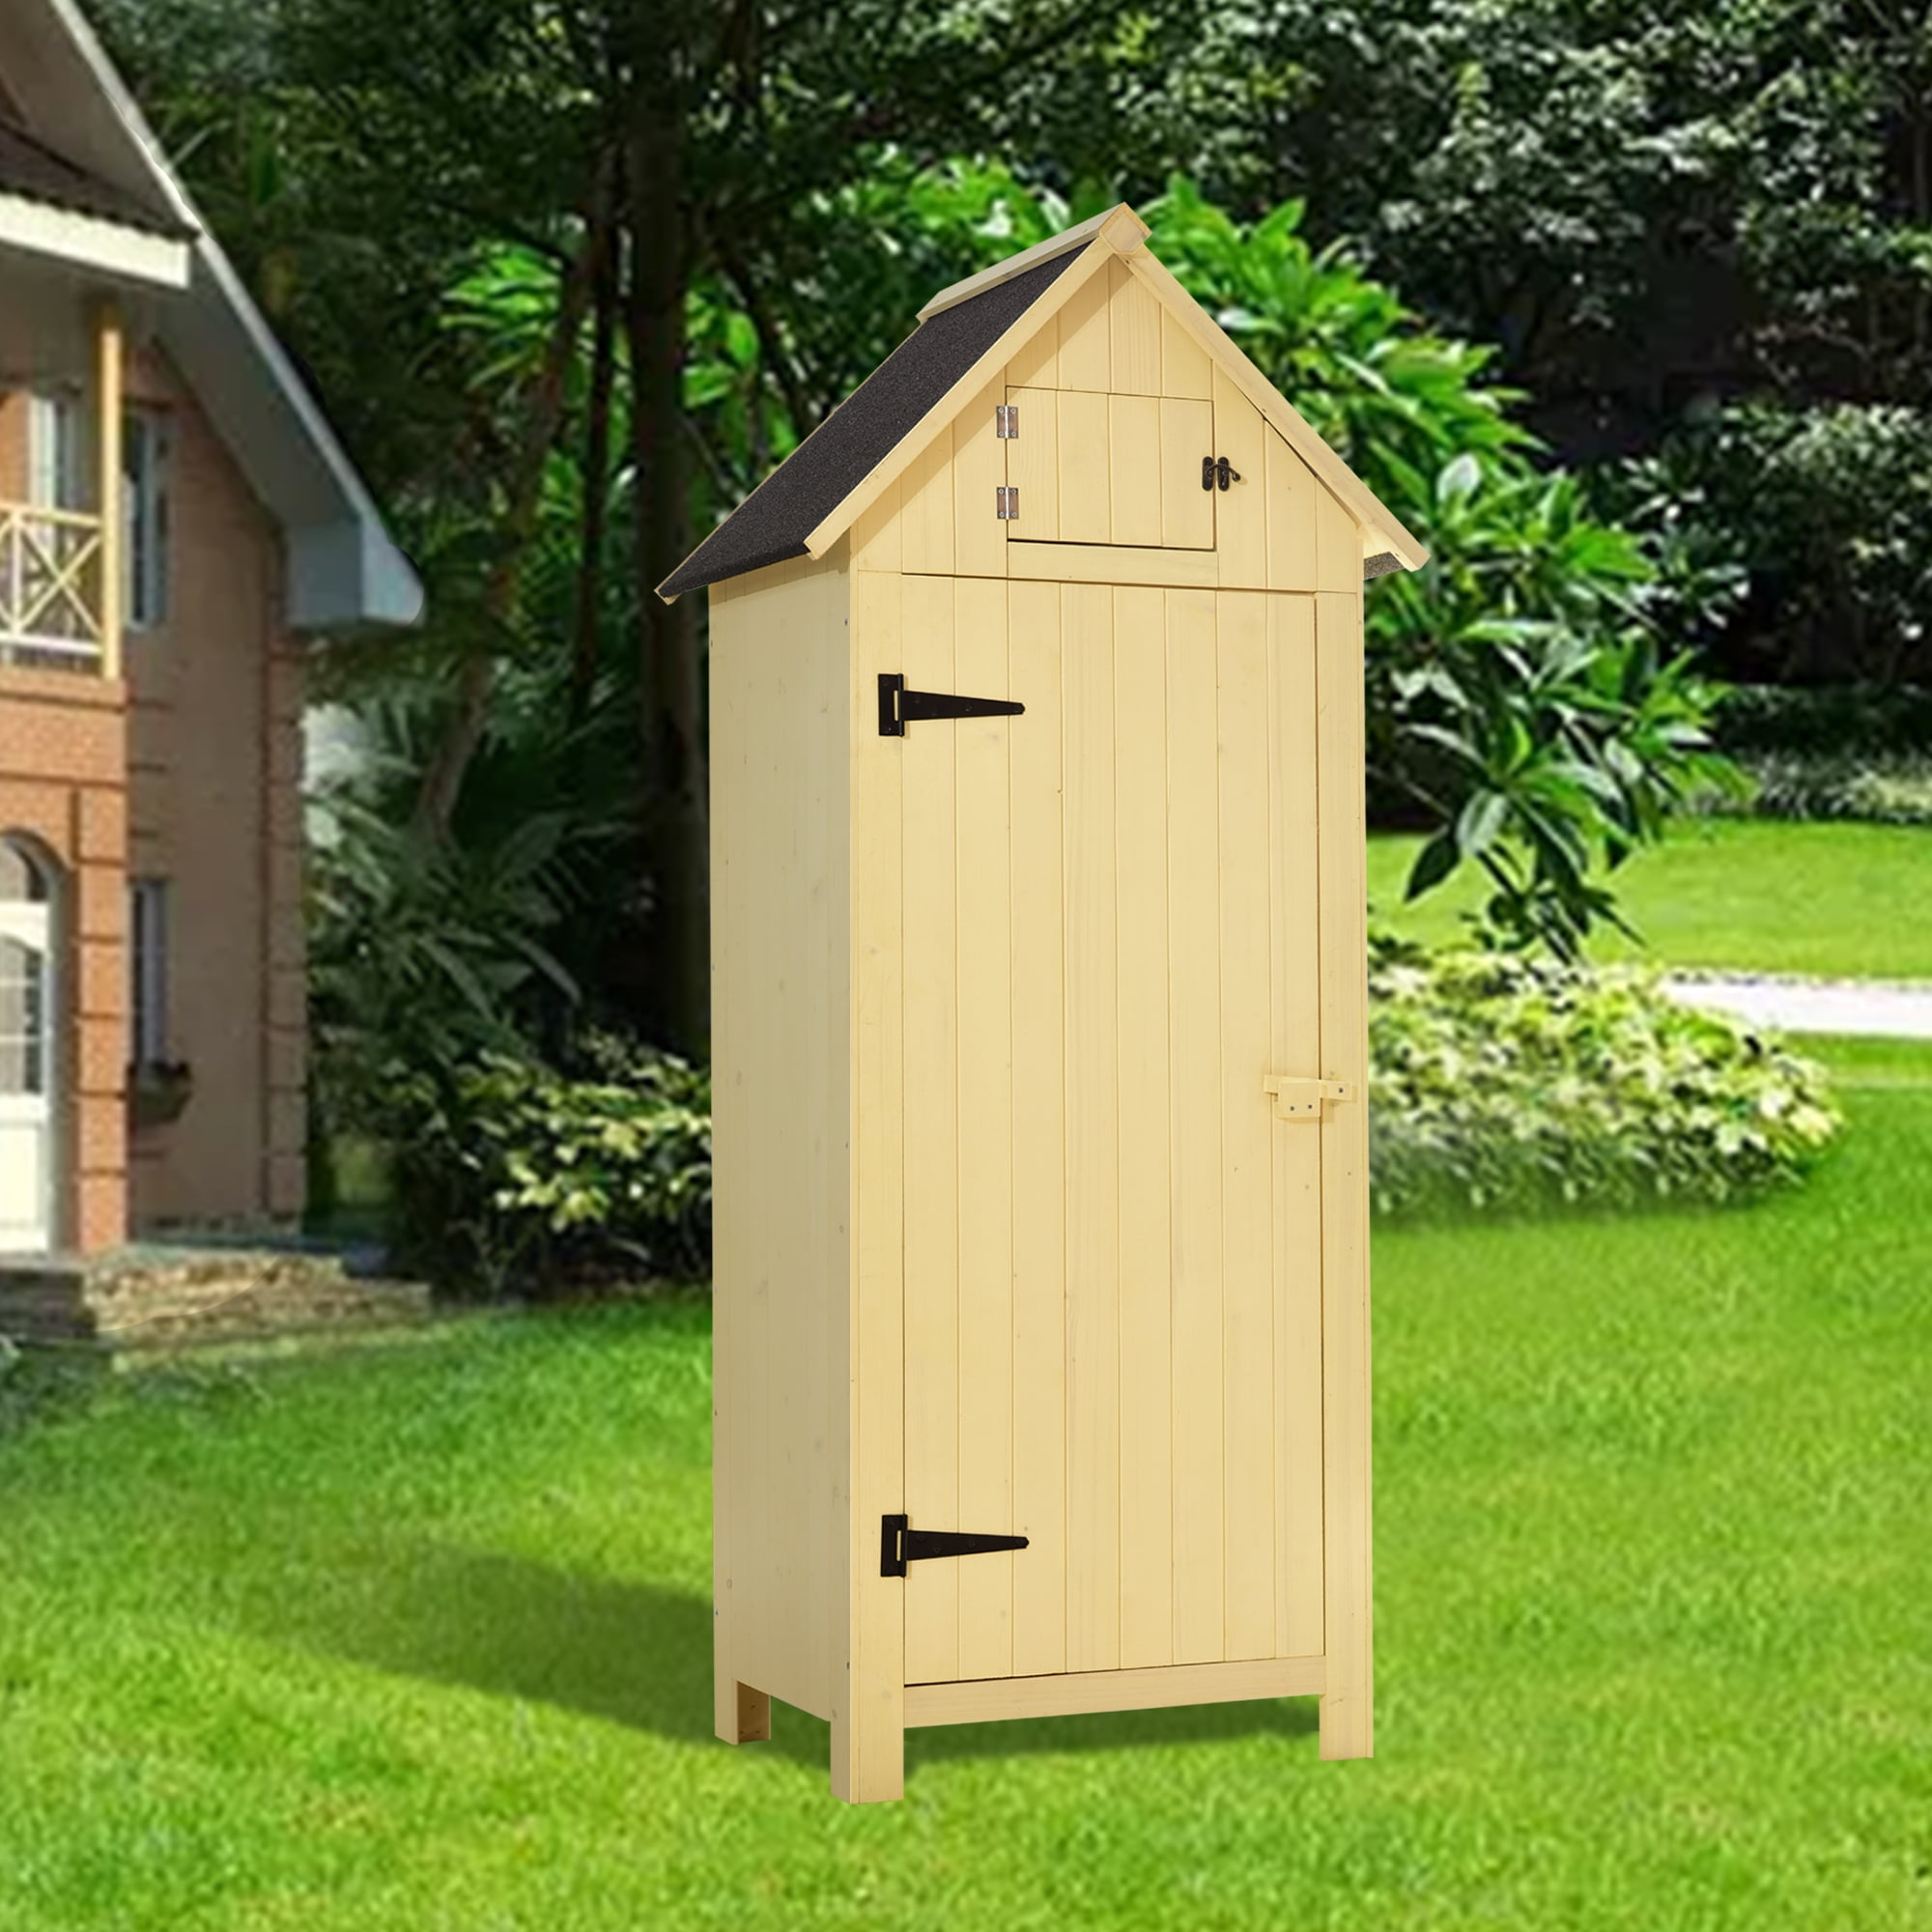 MCombo Outdoor Storage Cabinet Tool Shed Wooden Garden ...